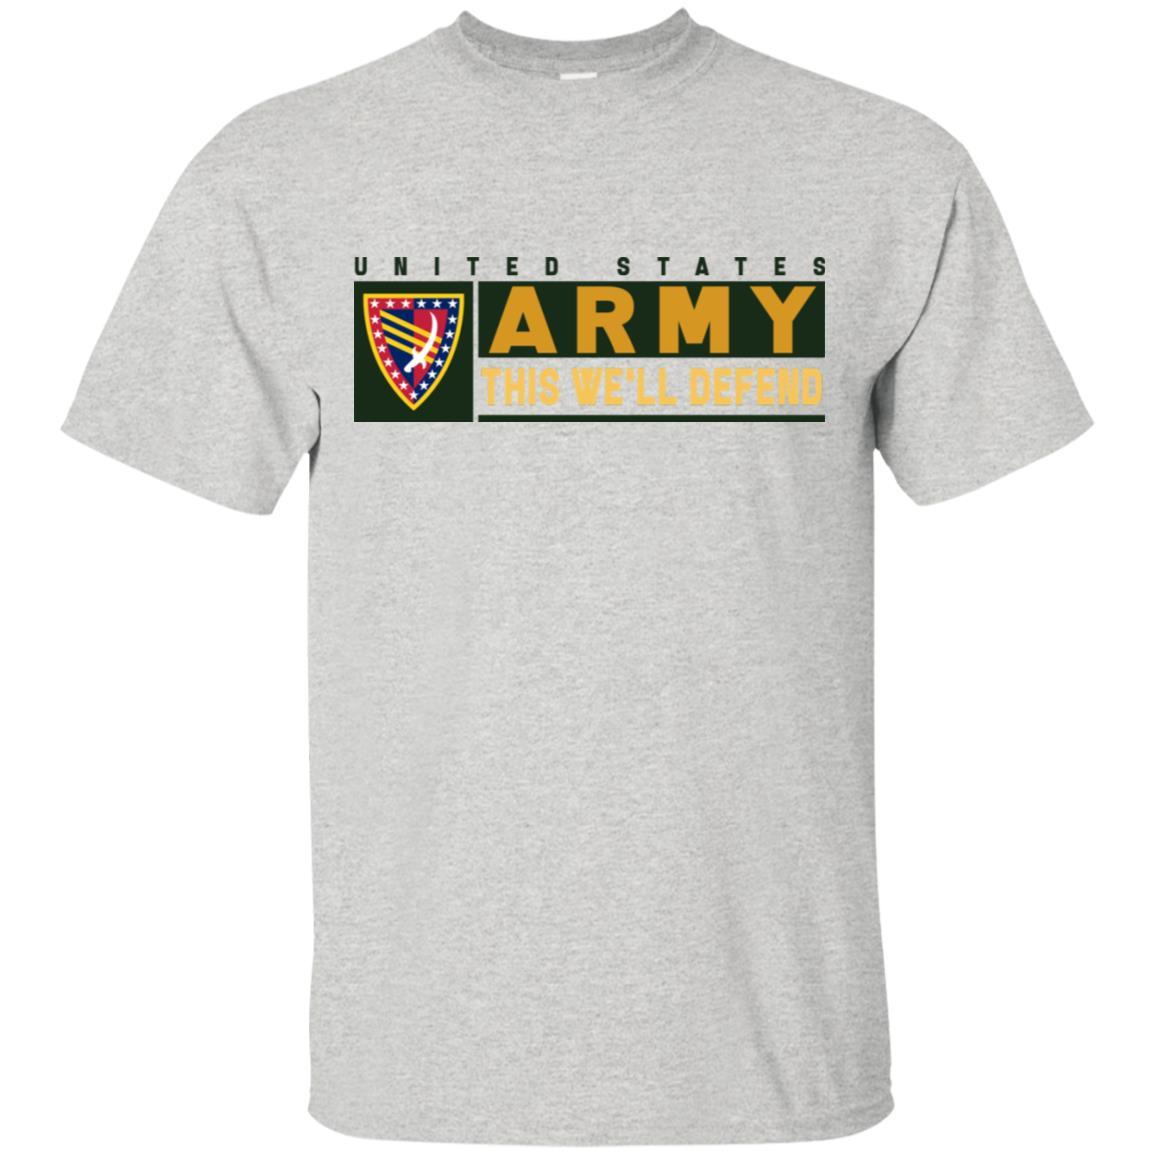 US Army 38 SUSTAINMENT BRIGADE- This We'll Defend T-Shirt On Front For Men-TShirt-Army-Veterans Nation